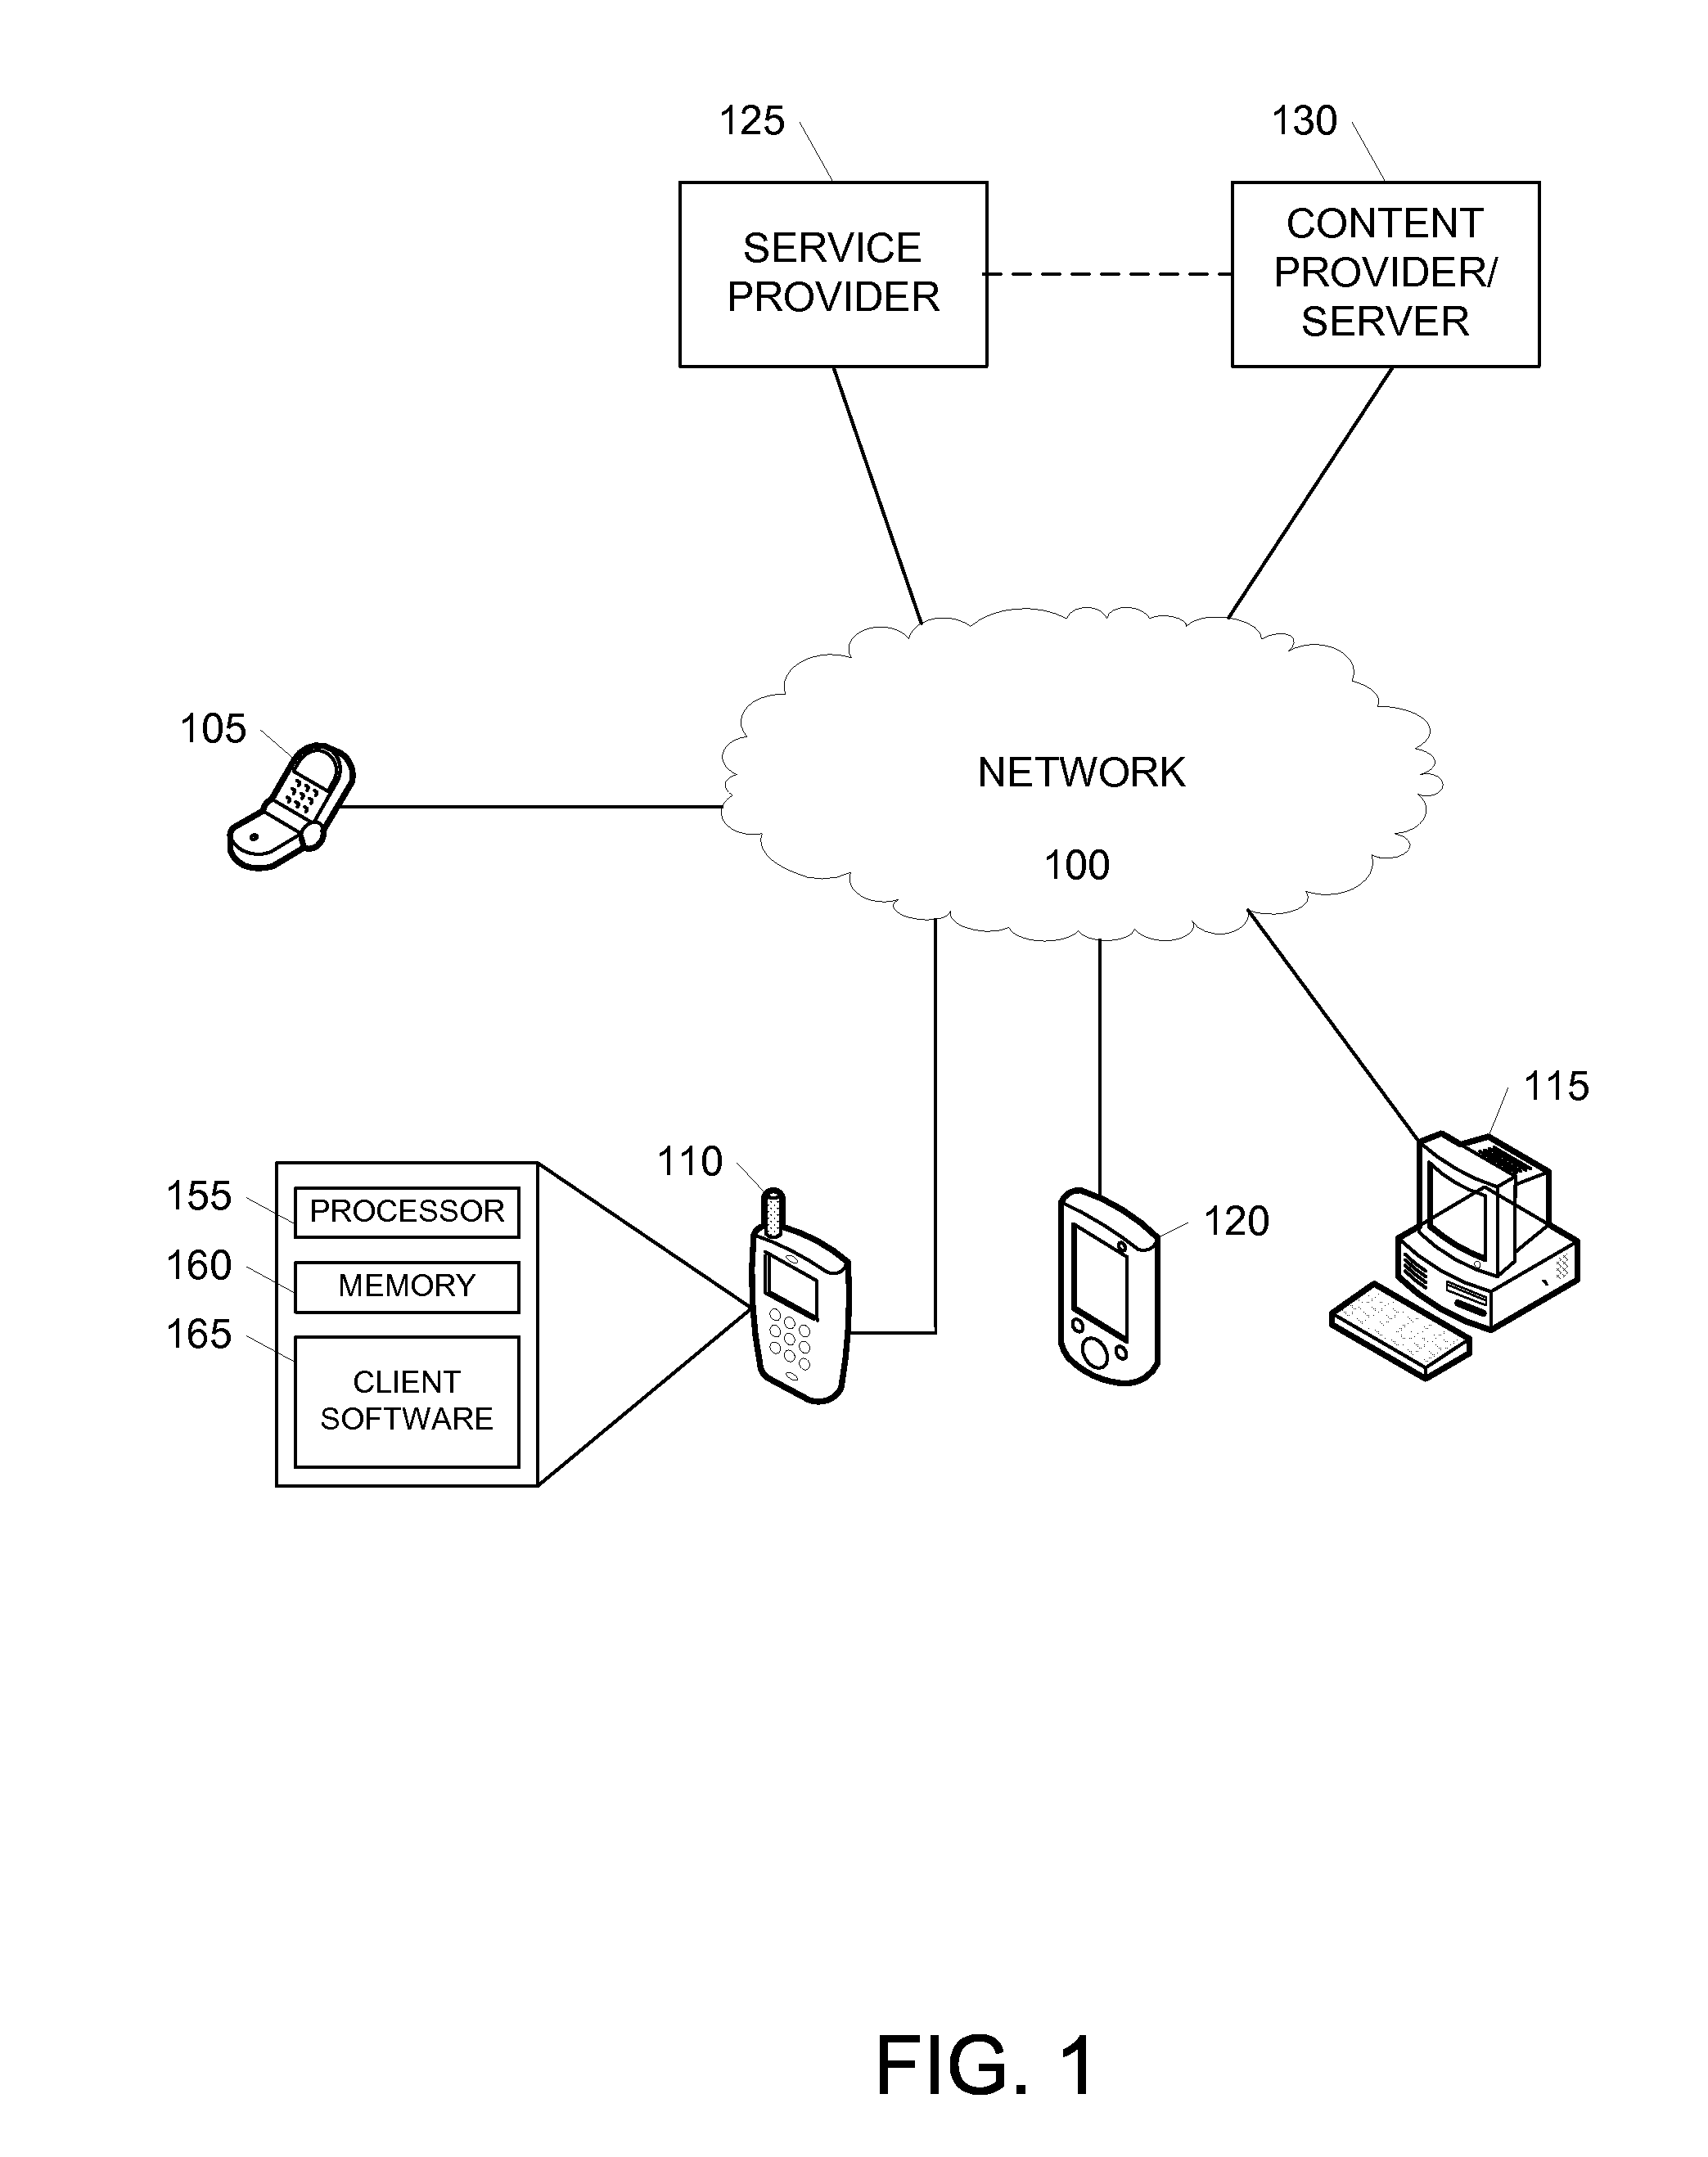 Mapping service components in a broadcast environment